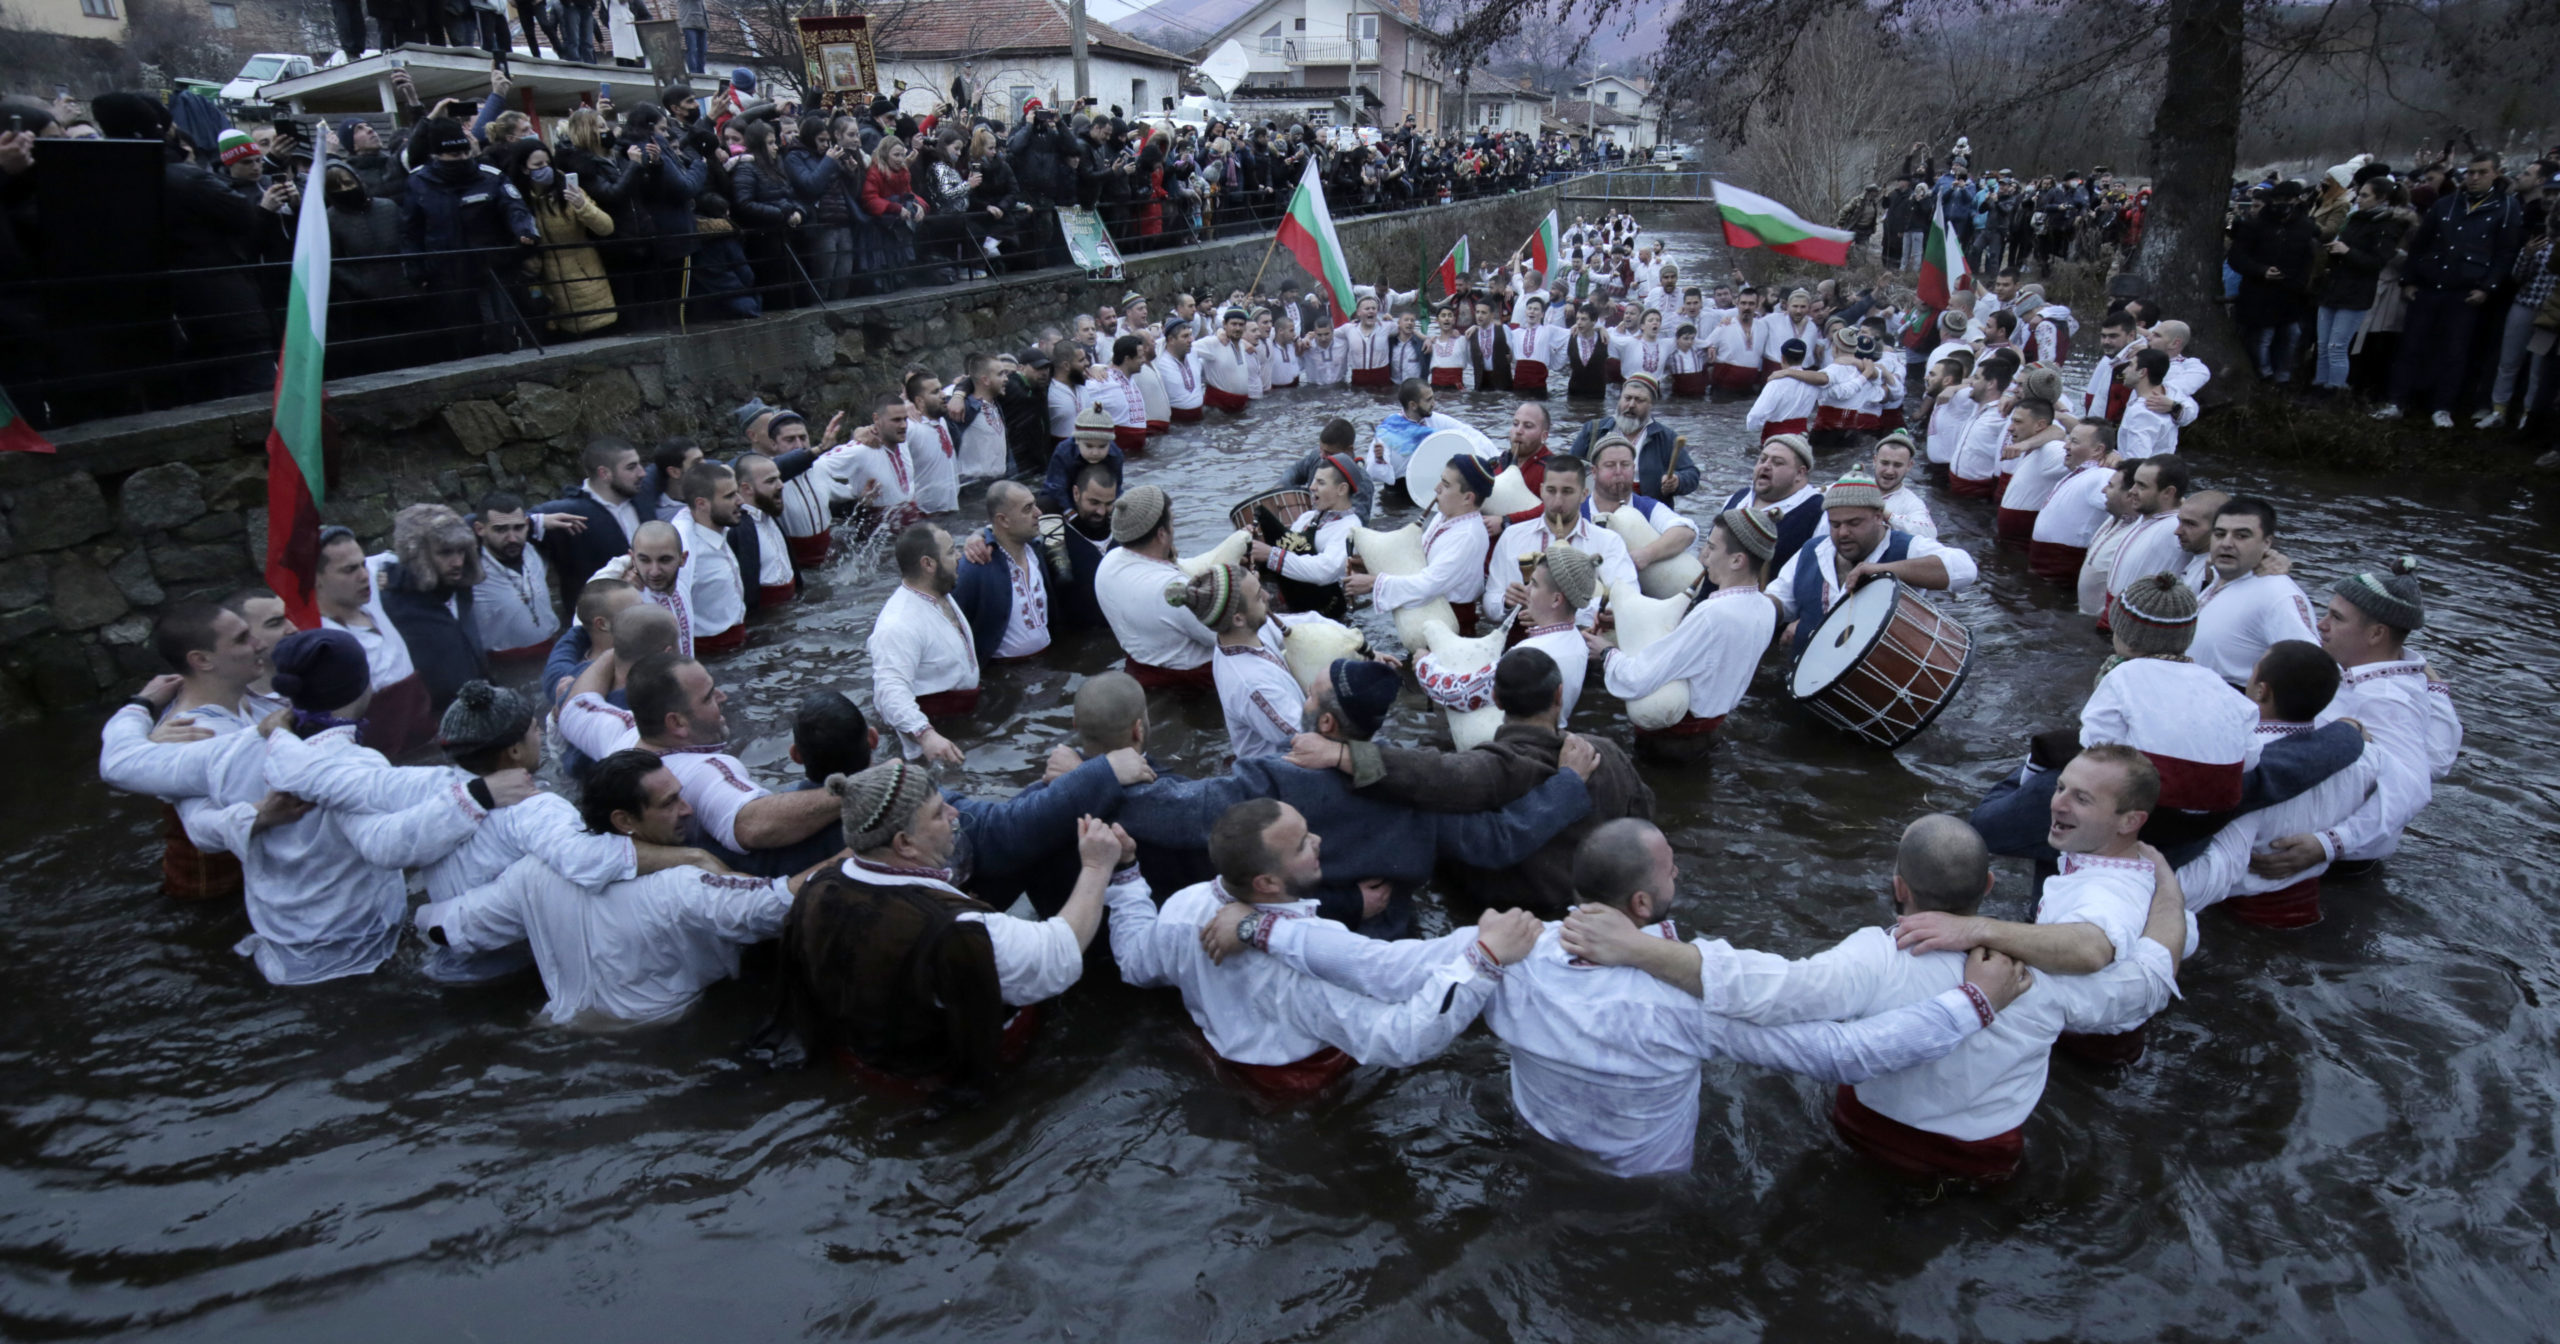 Citizens of the mountain town of Kalofer in central Bulgaria, clad in traditional garments, stand in the icy Tundzha River in an old ritual marking the feast of Epiphany on Jan. 6, 2021.